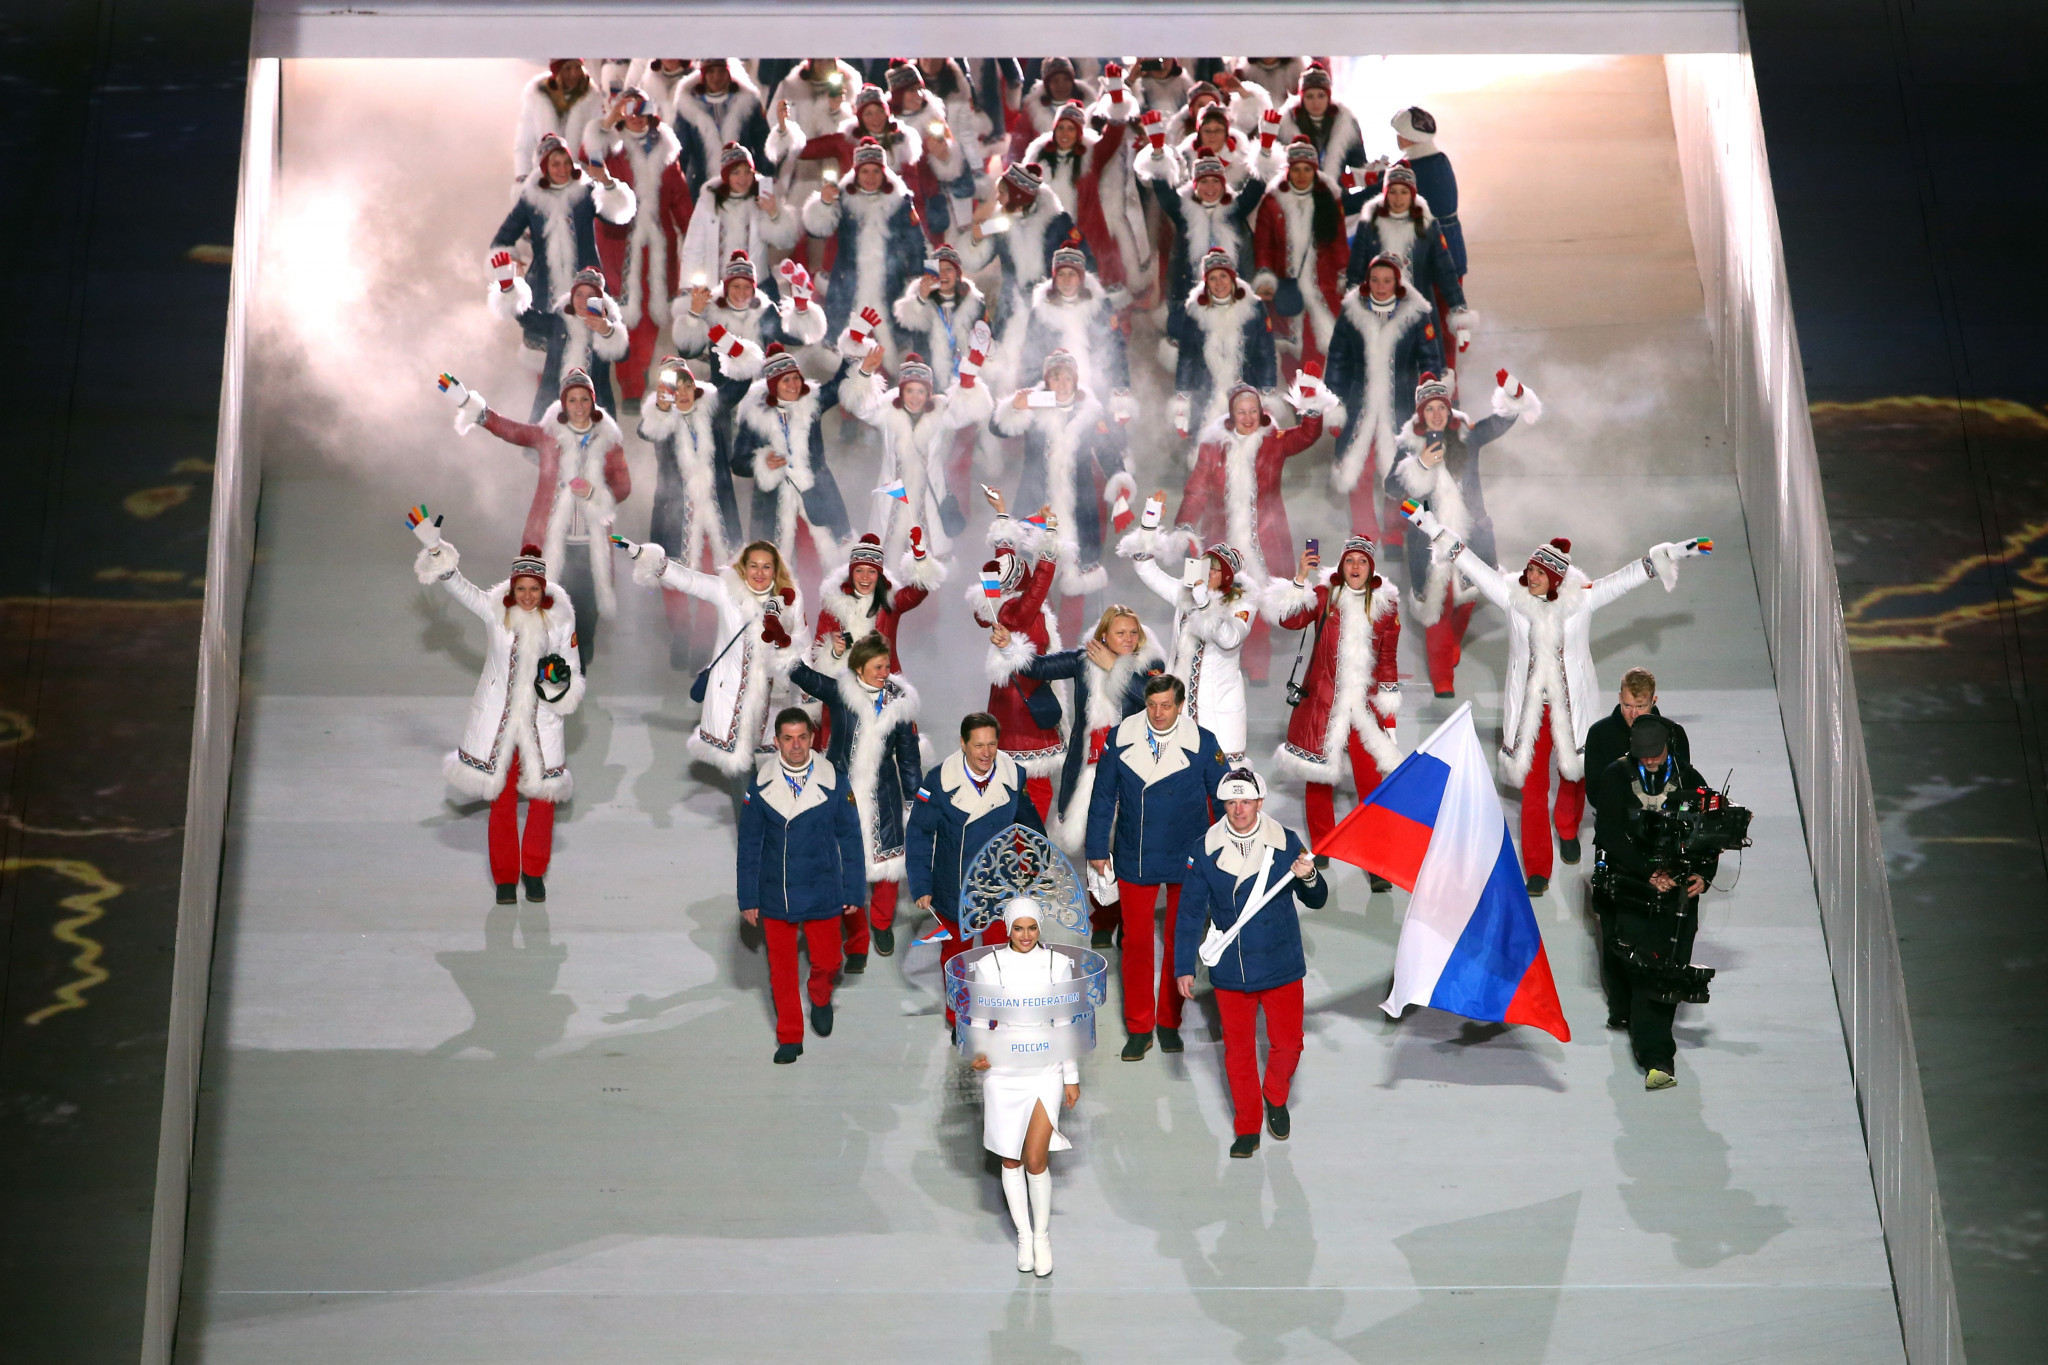 Alexander Zubkov, who has since been disqualified for doping, pictured carrying the Russian flag at the Opening Ceremony of Sochi 2014 ©Getty Images